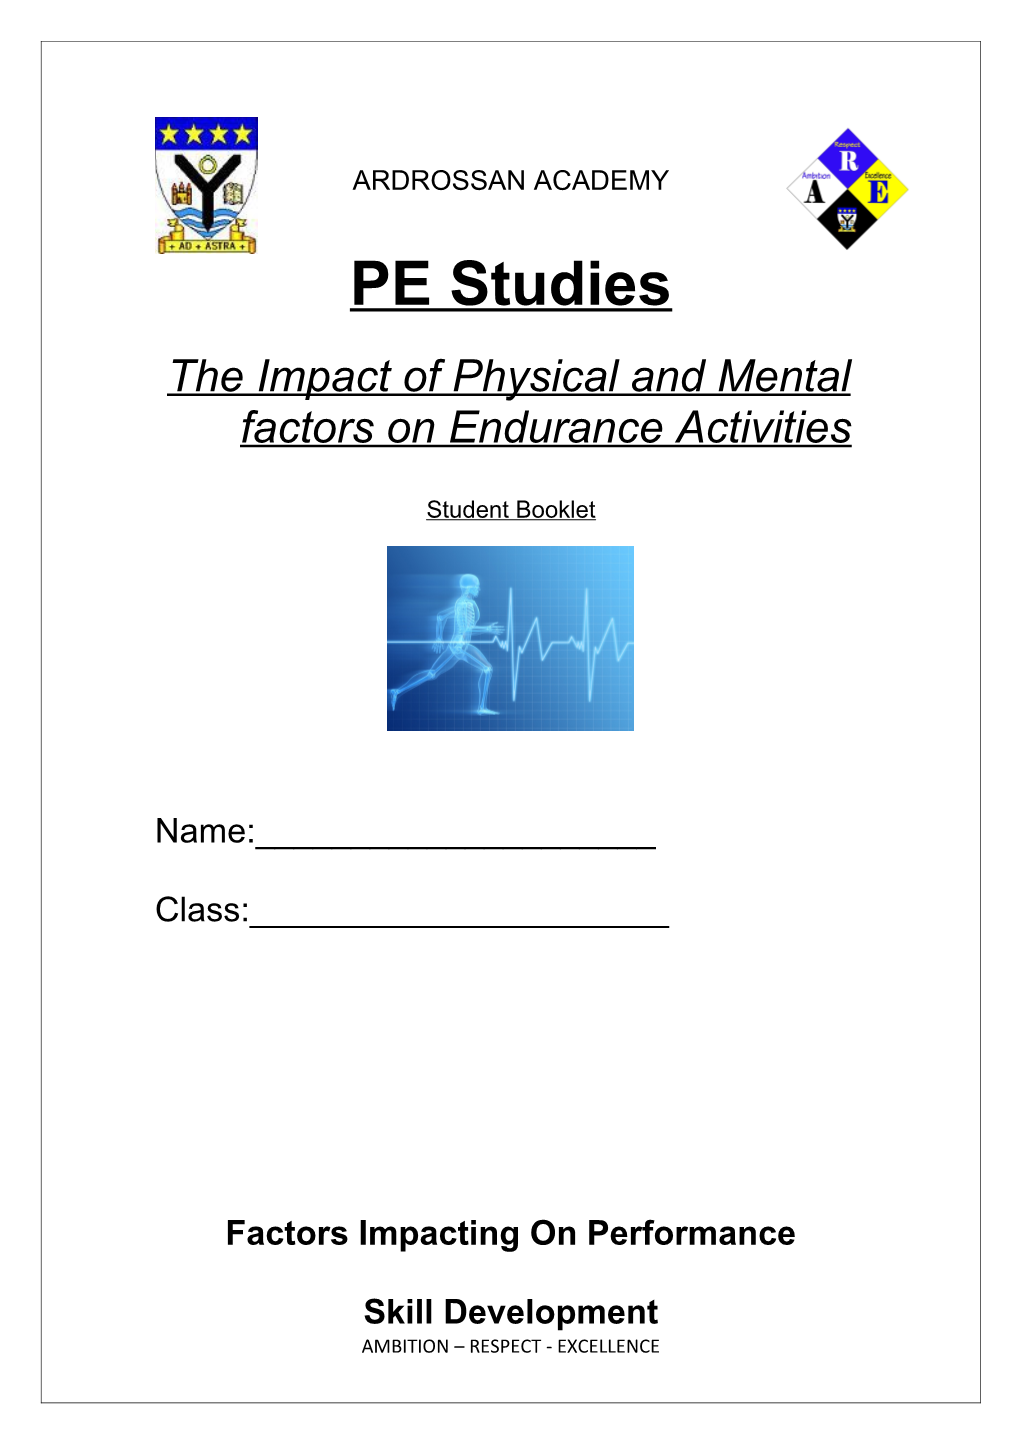 The Impact of Physical and Mental Factors on Endurance Activities